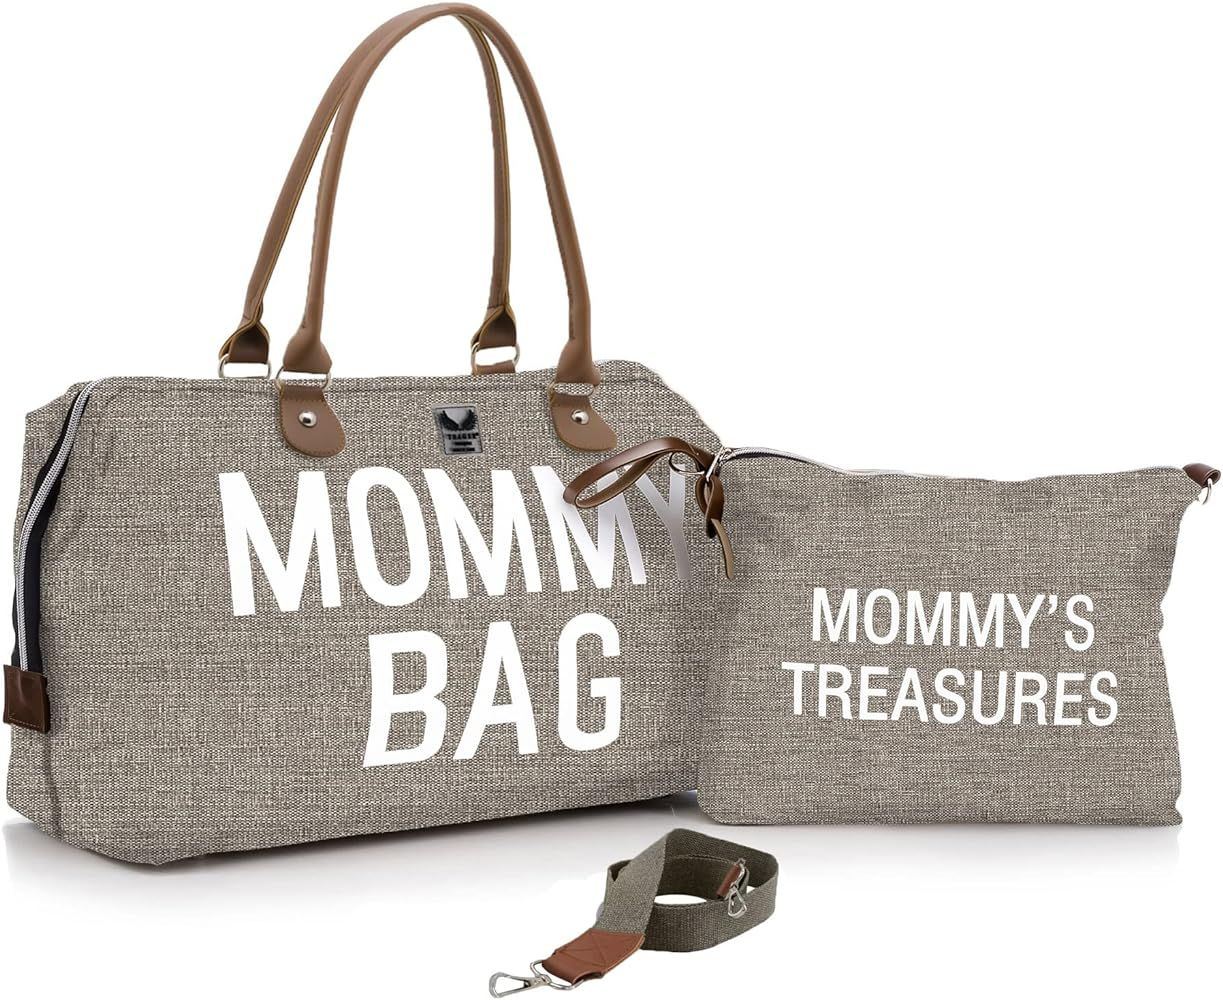 Diaper Bag Tote, Chqel Mommy Bag for Hospital & Maternity with Mommy's Treasures Bag, Large Capacity | Amazon (US)